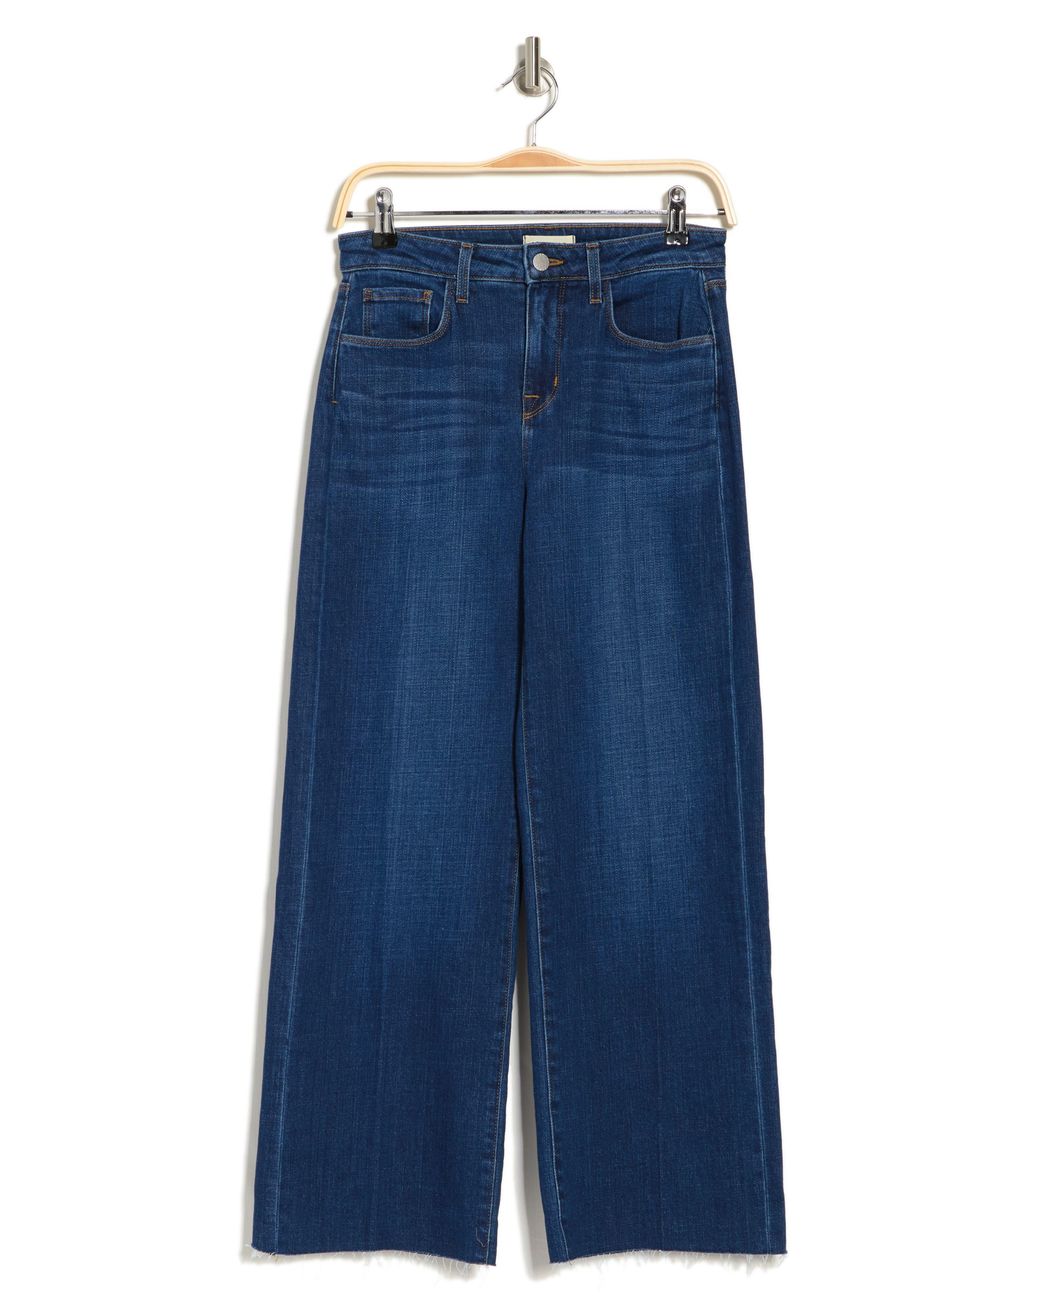 L'Agence Danica Crop Wide Leg Jeans In York At Nordstrom Rack in Blue | Lyst